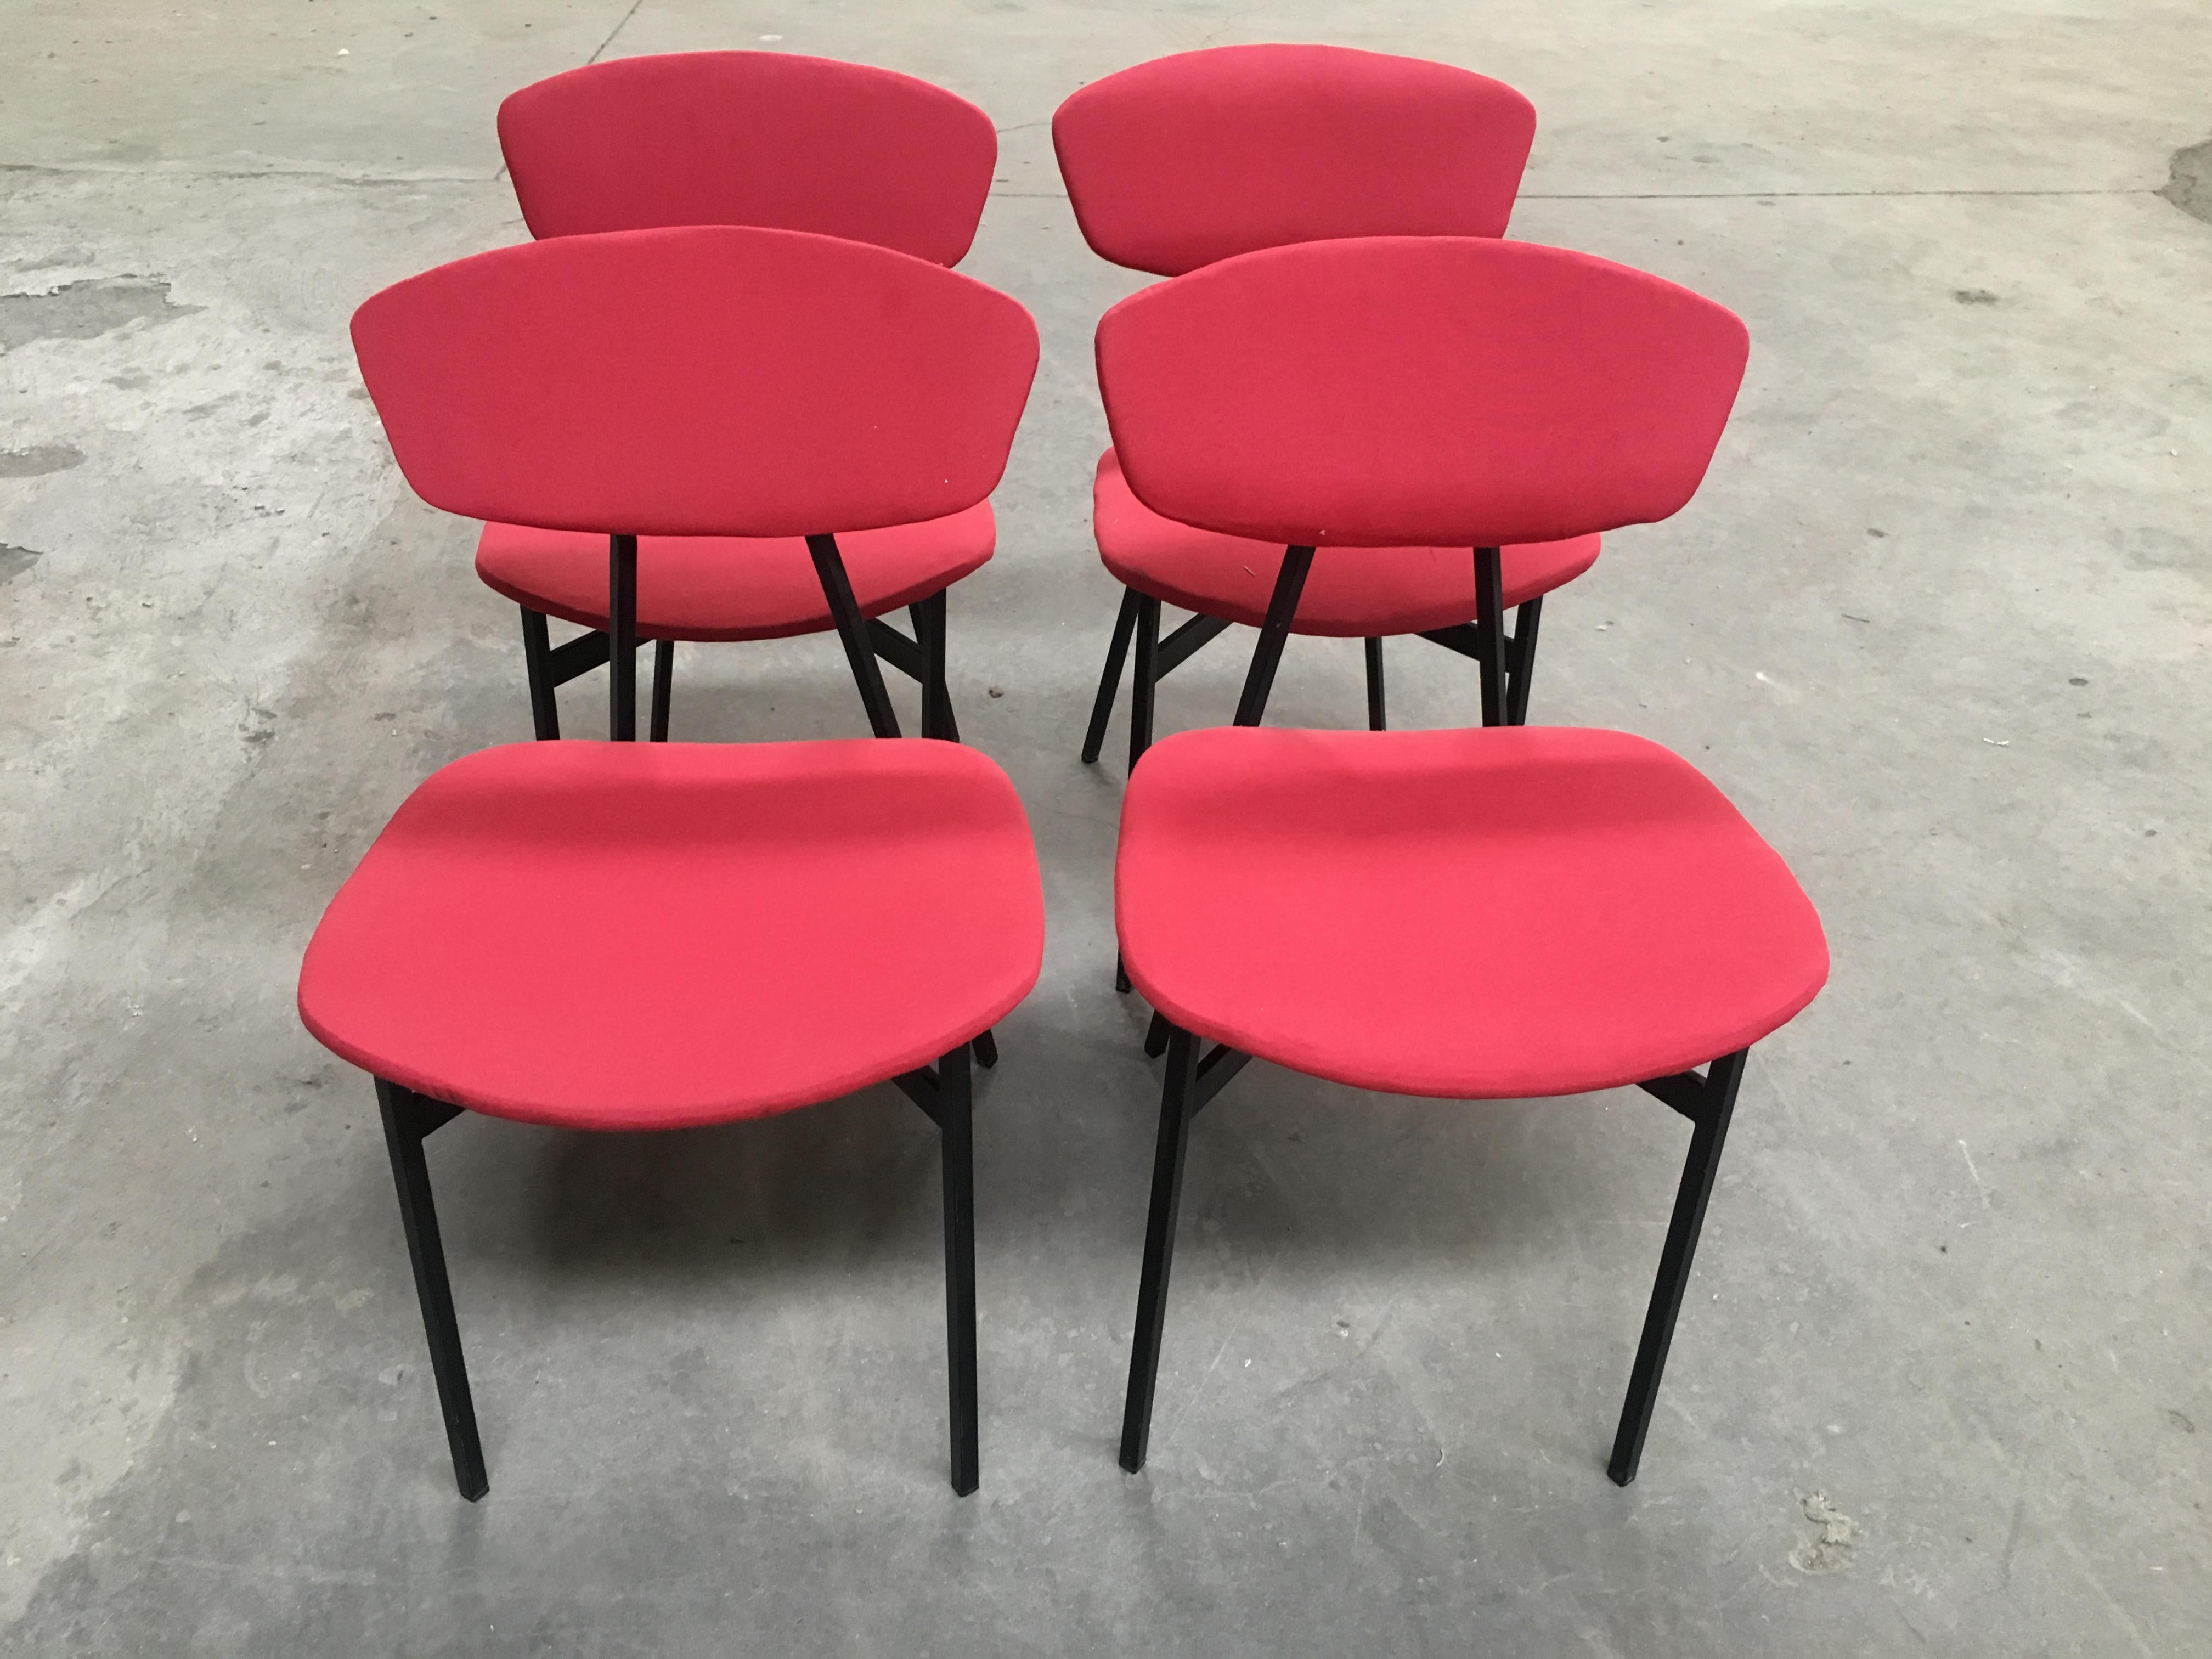 Lacquered Mid-Century Modern Italian Set of 4 Iron Chairs with Original Red Upholstery